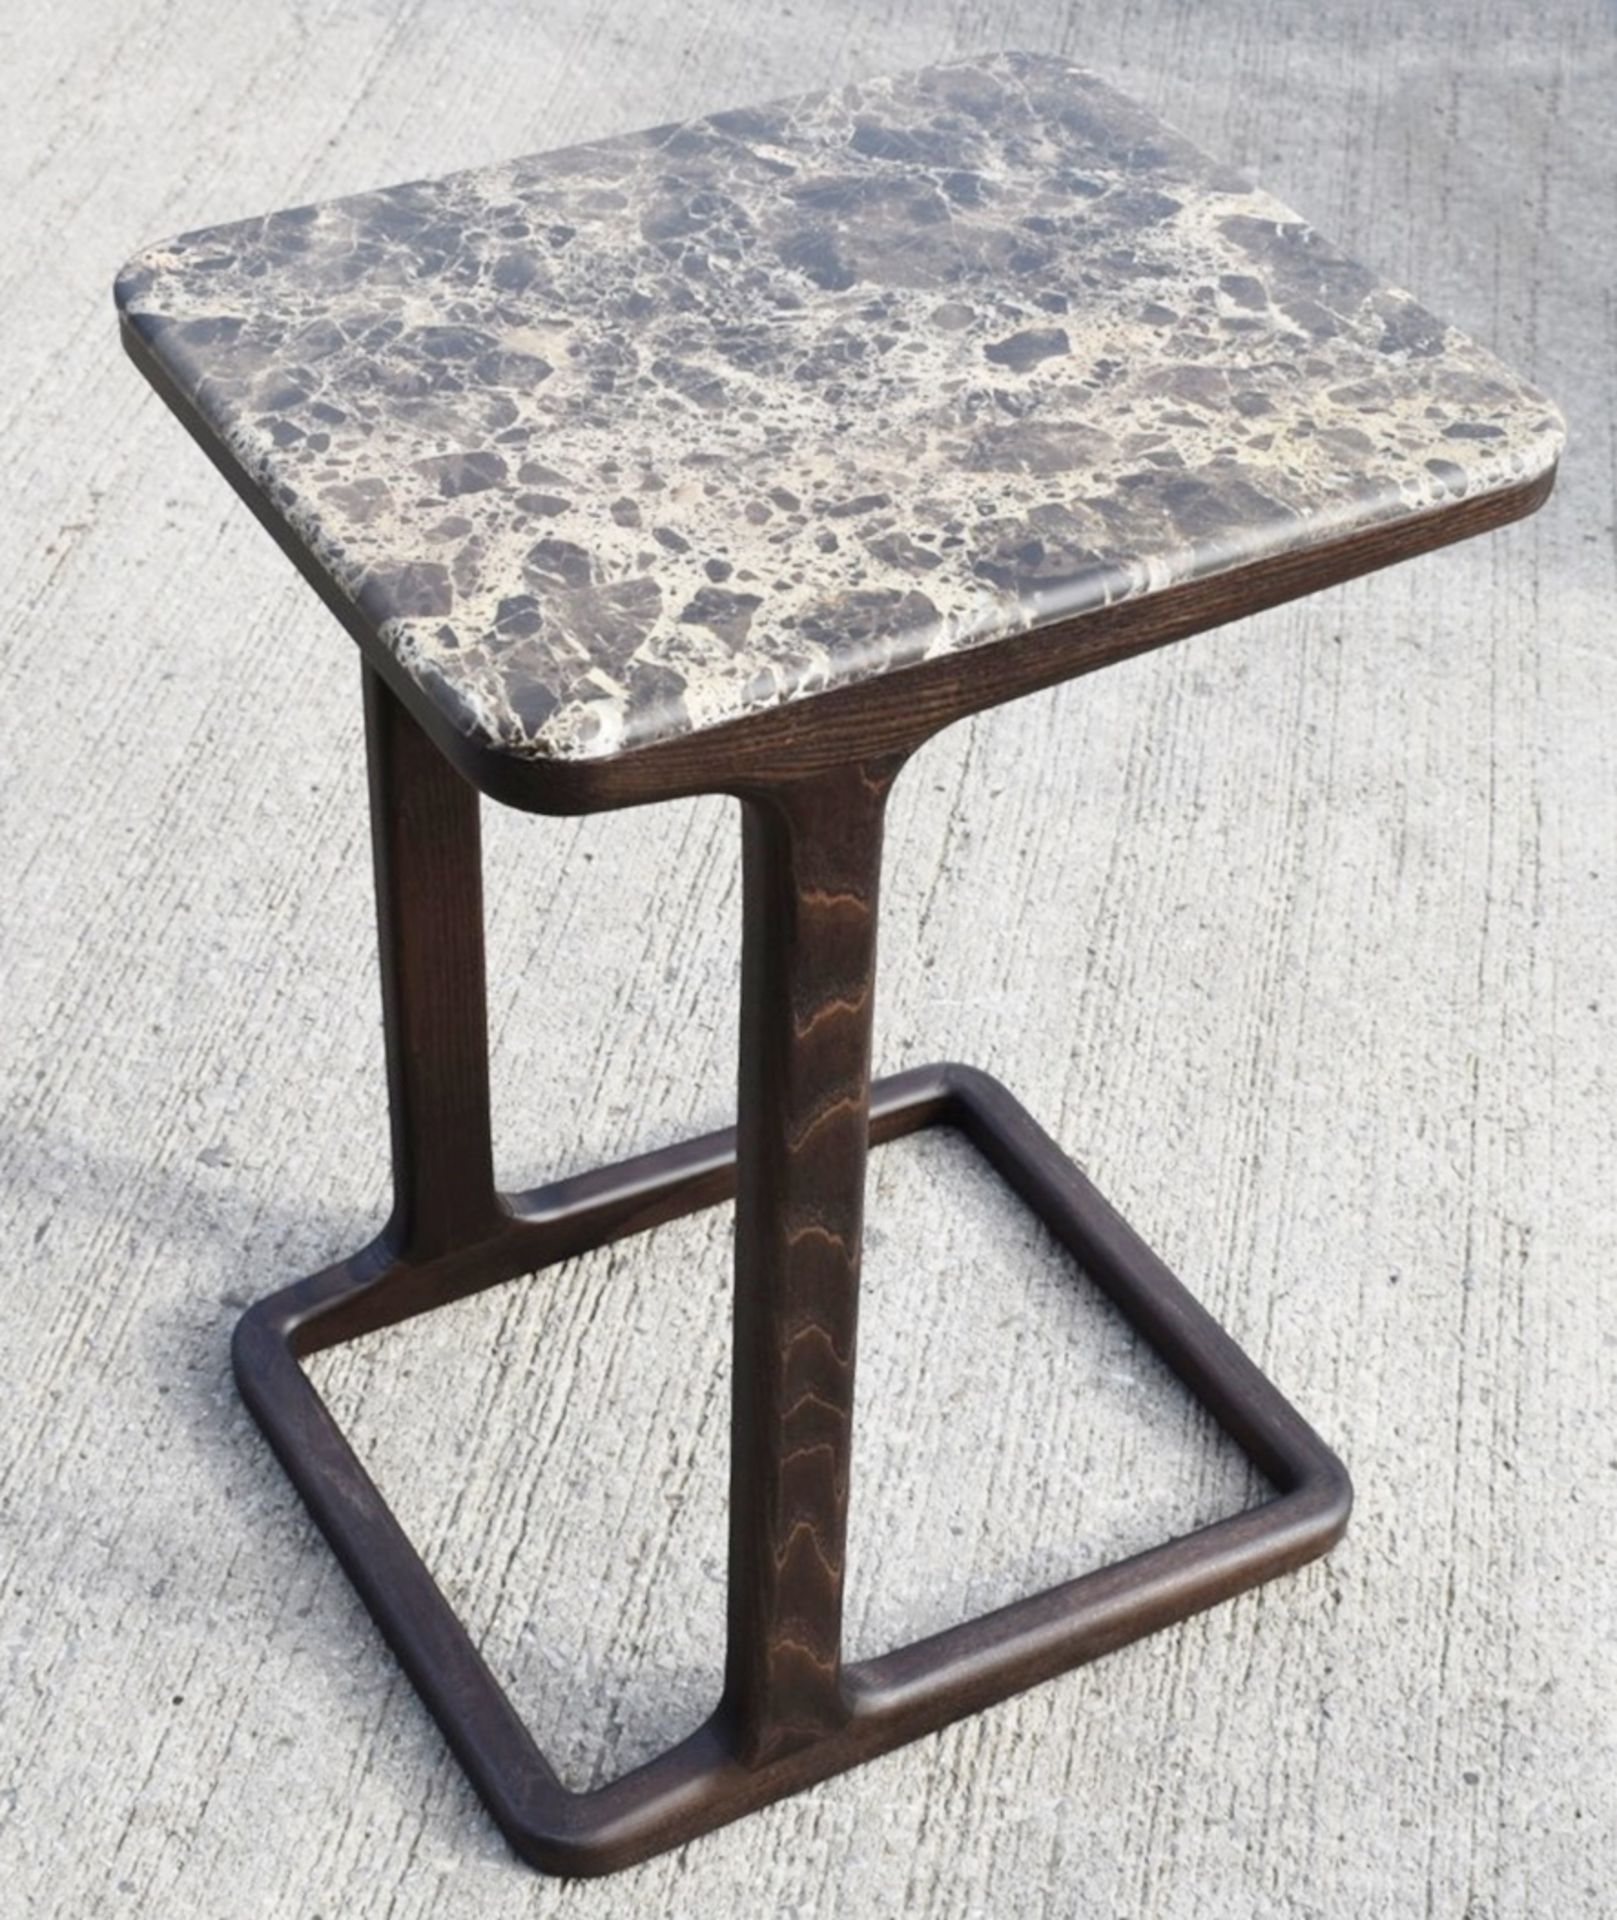 1 x PORADA SCRIPT Square Designer Solid Wood Side Table With Marble Top - Original Price £1,300 - Image 2 of 4